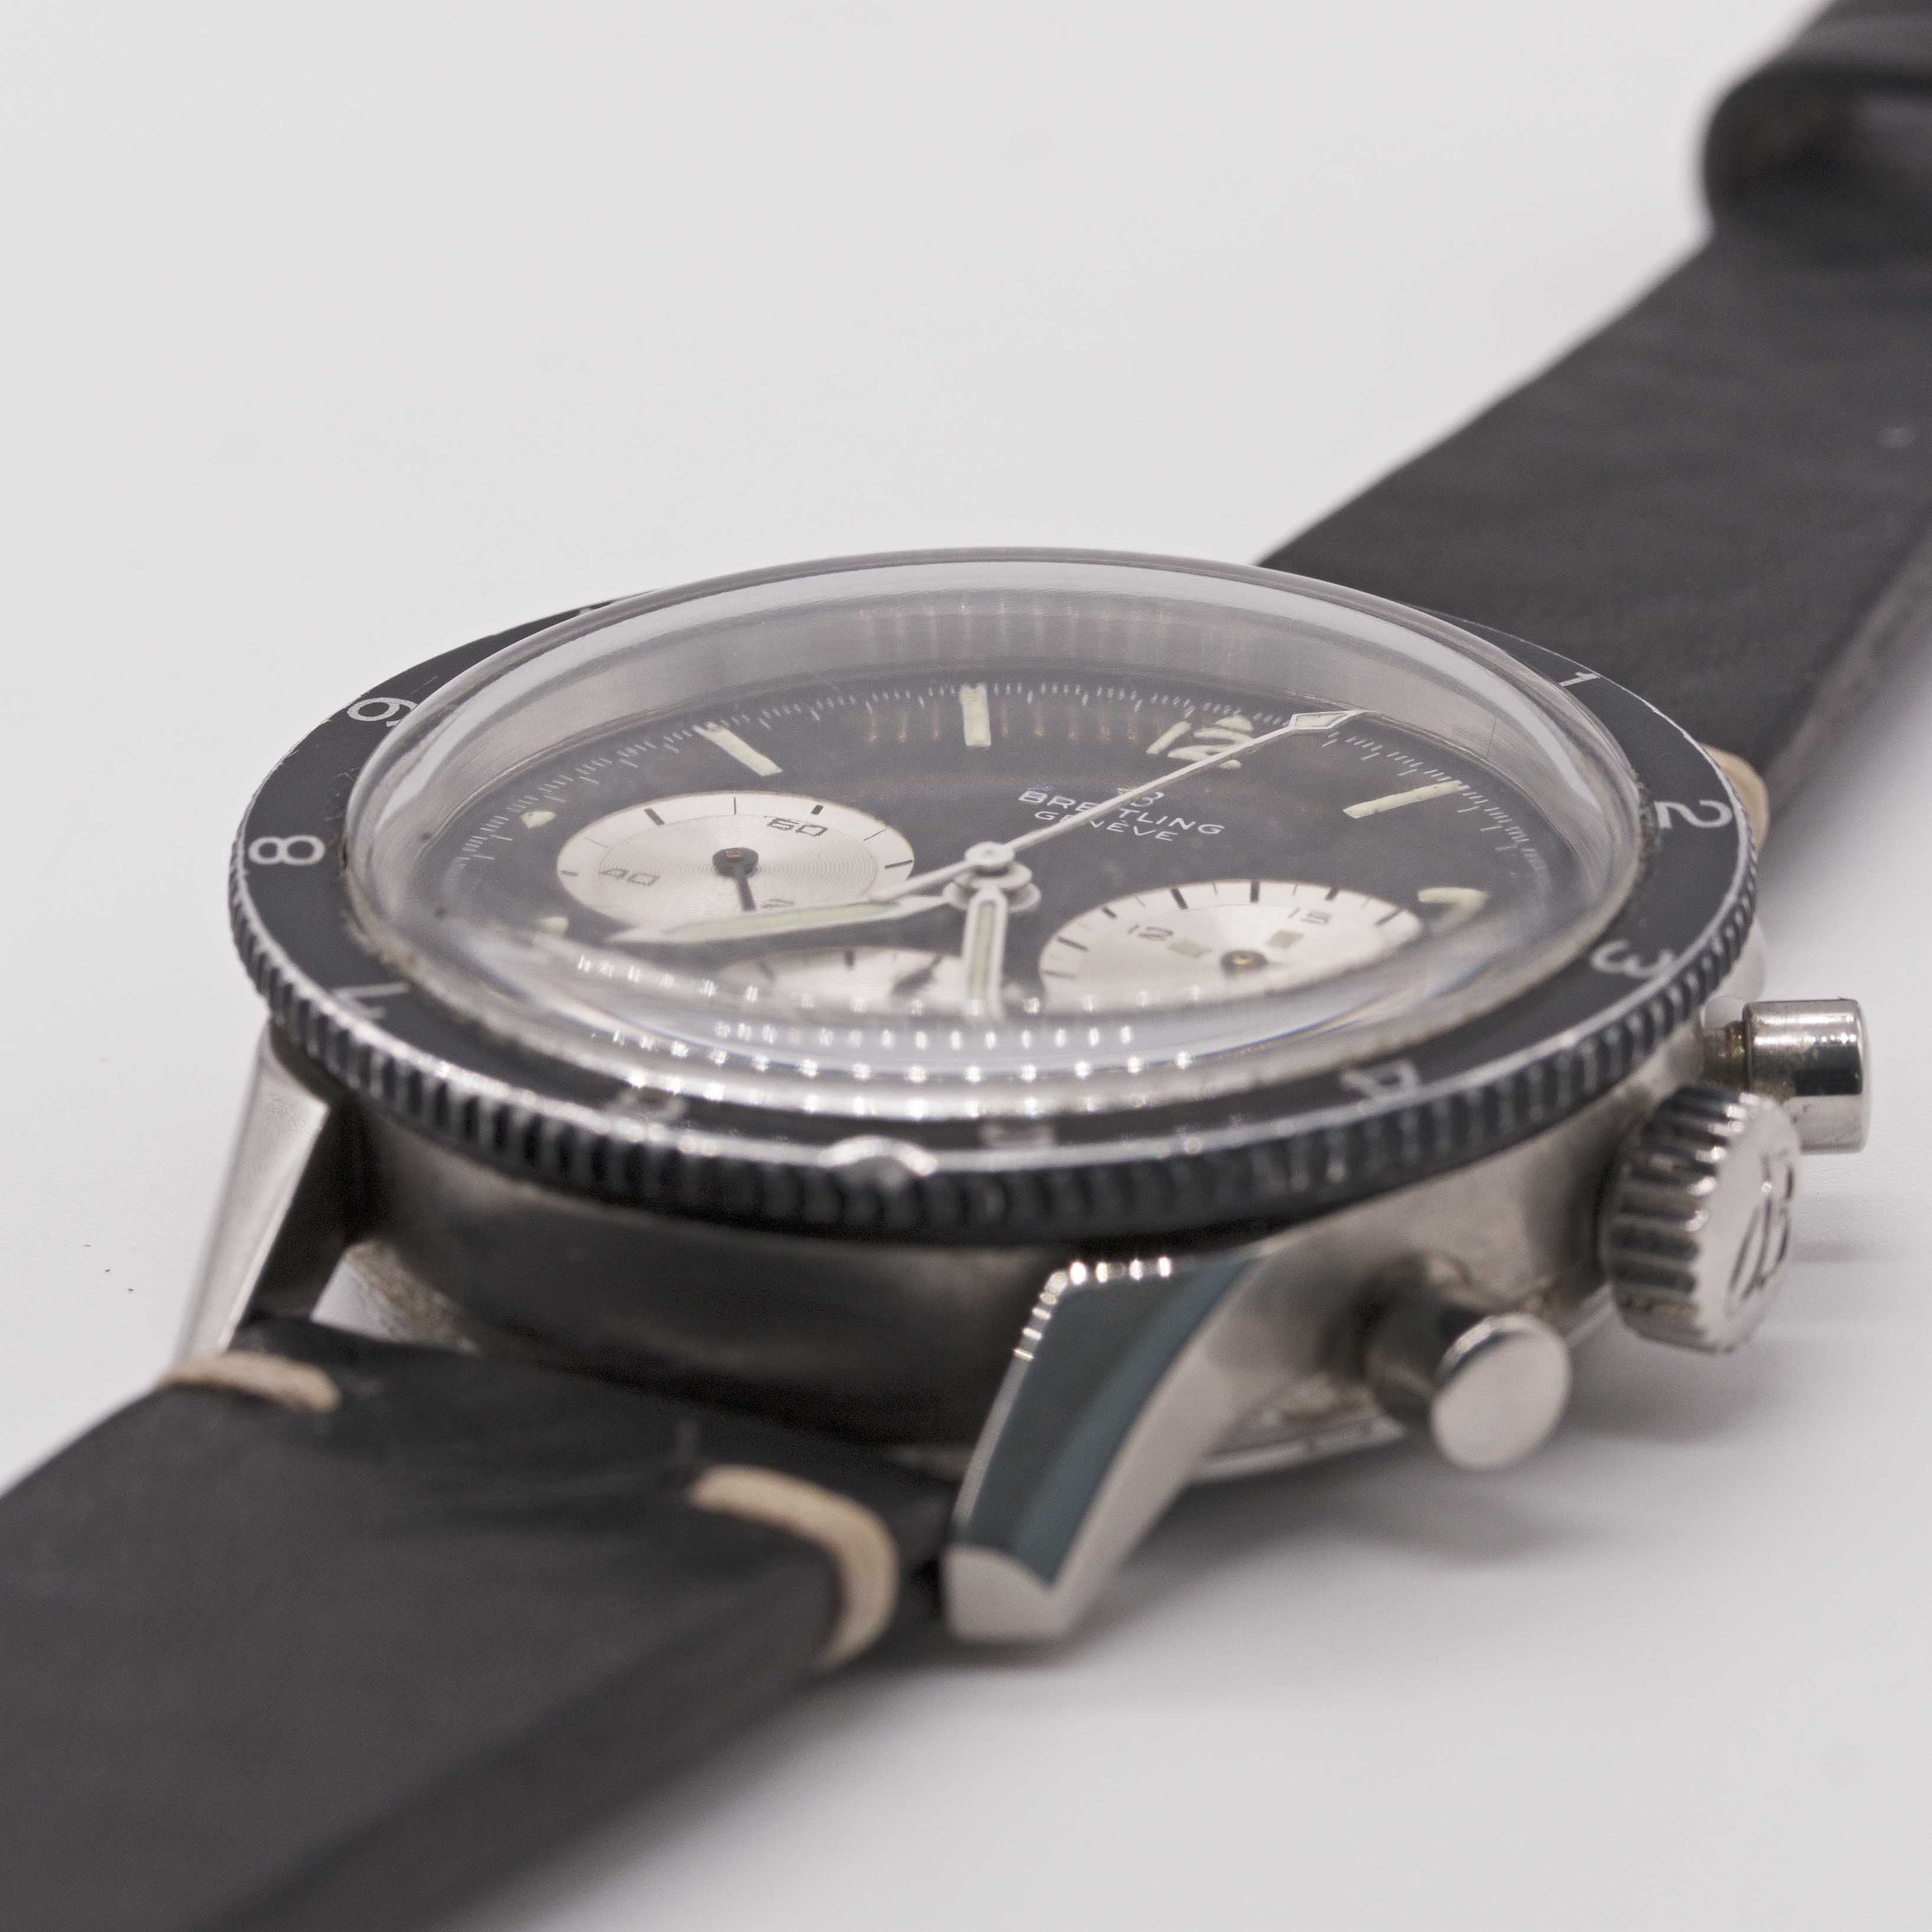 A RARE GENTLEMAN'S STAINLESS STEEL BREITLING CO PILOT "JEAN-CLAUDE KILLY" CHRONOGRAPH WRIST WATCH - Image 4 of 9